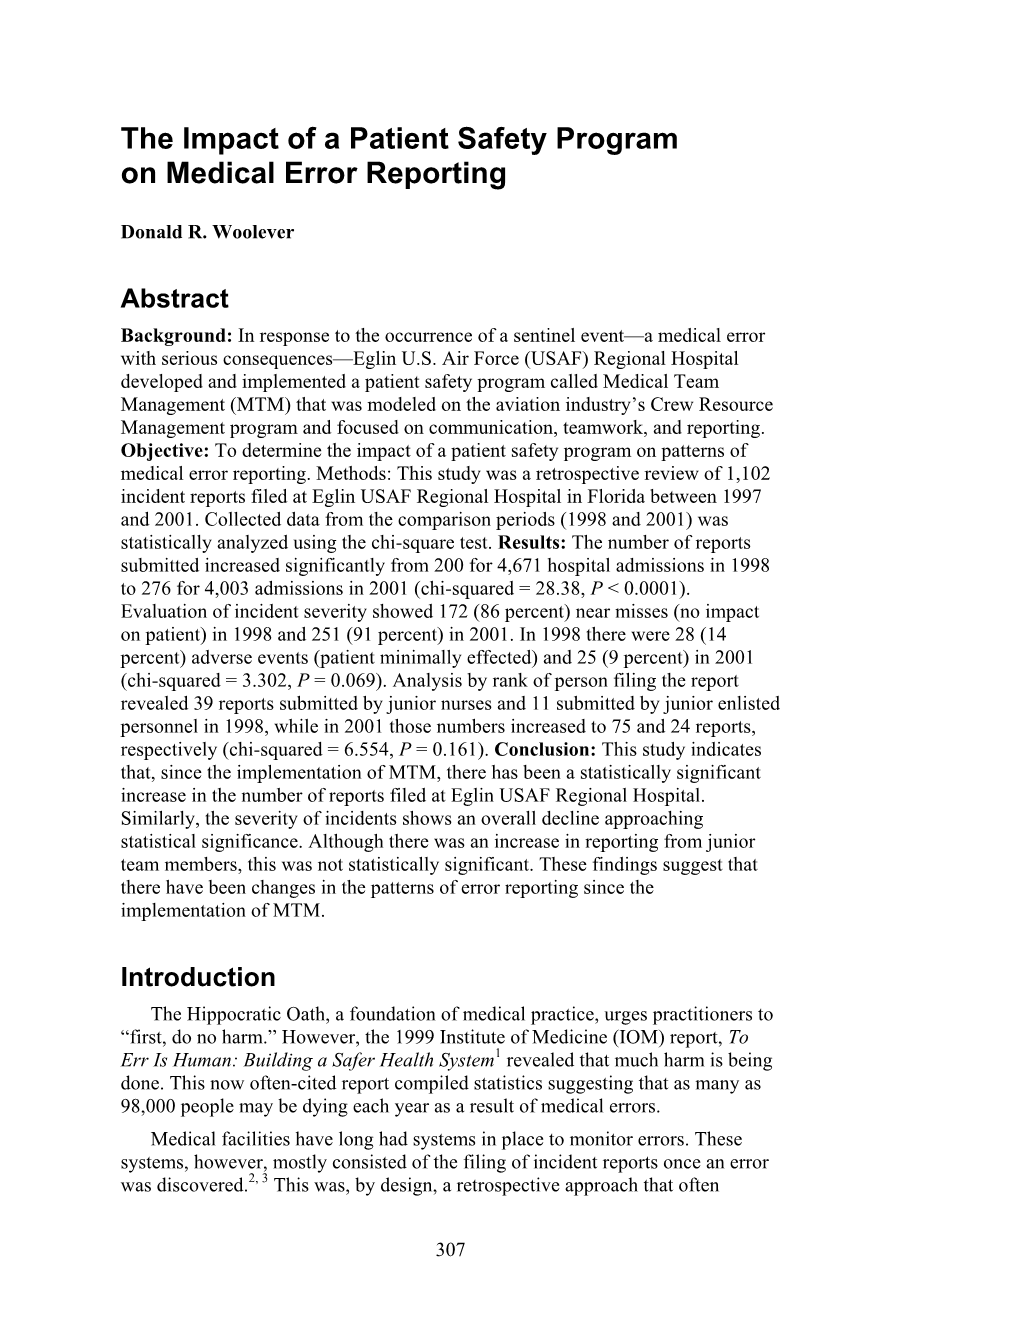 The Impact of a Patient Safety Program on Medical Error Reporting